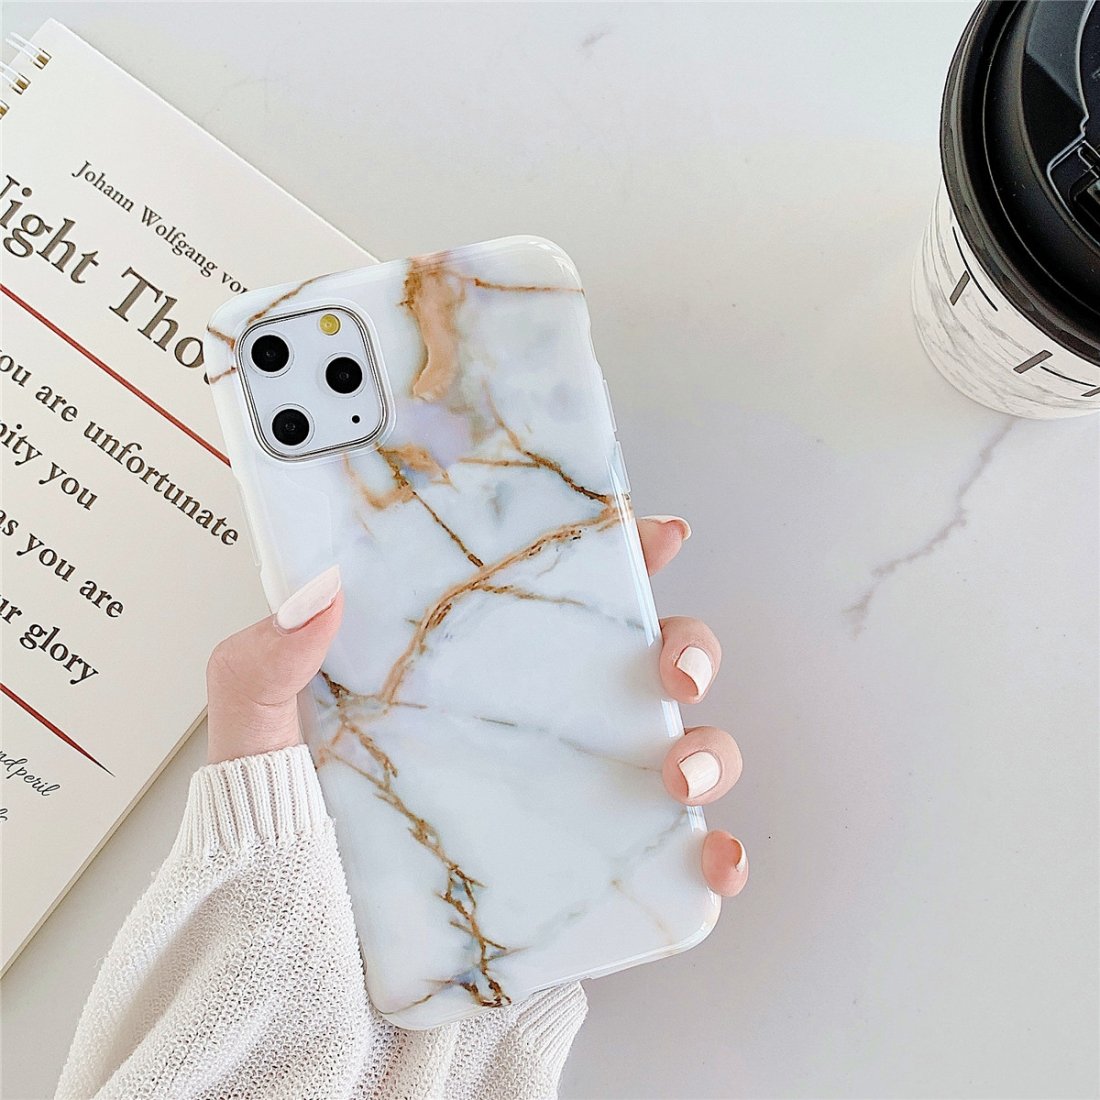 AMZER Marble Design Case for iPhone 11 Pro Slim IMD TPU Protective Case with HD Designs - White Gold - image 1 of 4